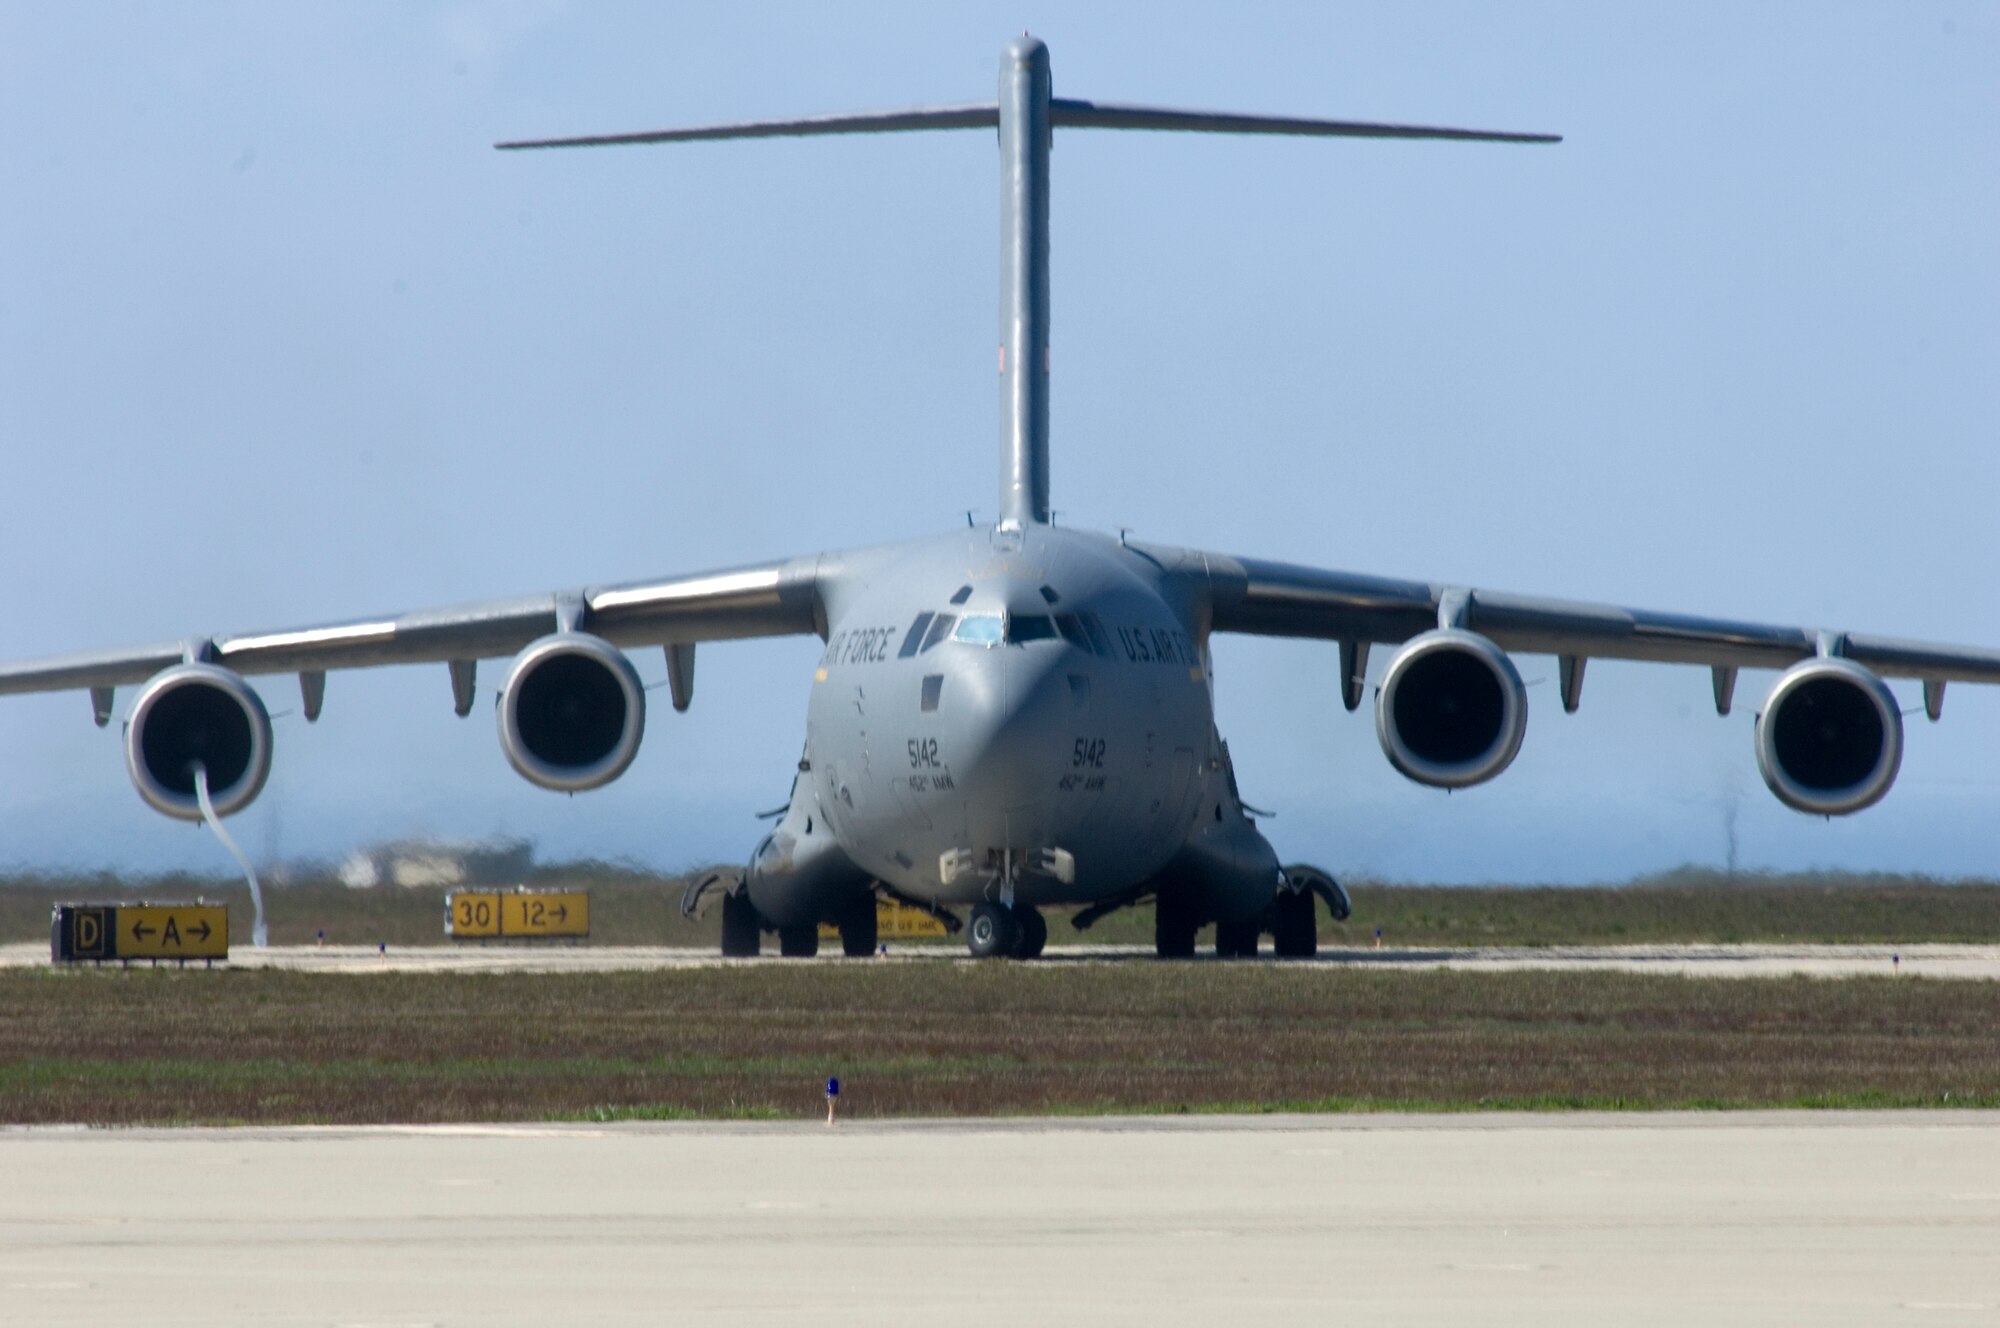 VANDENBERG AIR FORCE BASE, Calif. -- A C-17 Globemaster III, stationed at March Air Reserve Base, Calif., performs a reverse thrust maneuver for training here Tuesday, March 9, 2010. While there are no active flying squadrons, Vandenberg's runway is often used for training not only for aircraft, but for emergency response as well. (U.S. Air Force photo/Staff Sgt. Levi Riendeau)